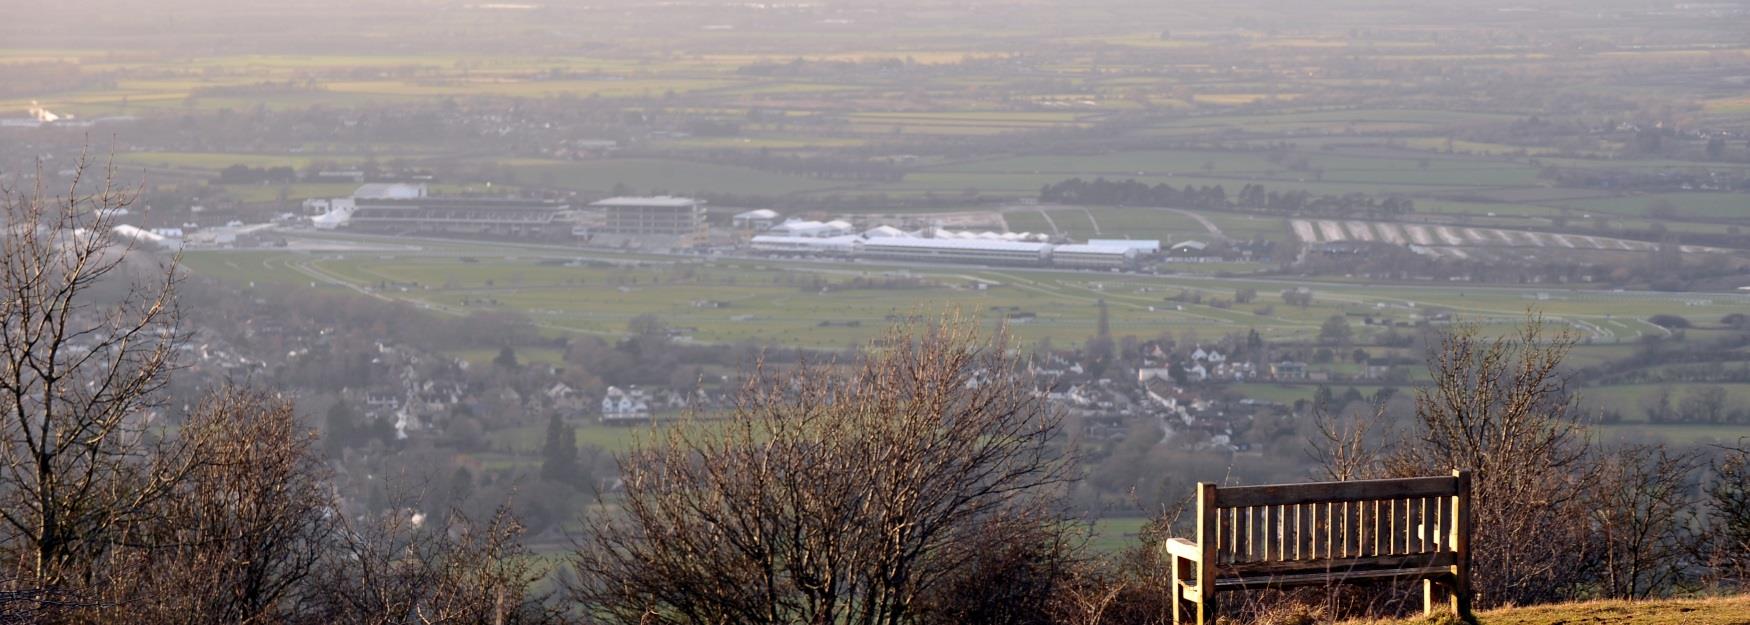 Spectacular view from Cleeve Hill overlooking Cheltenham racecourse